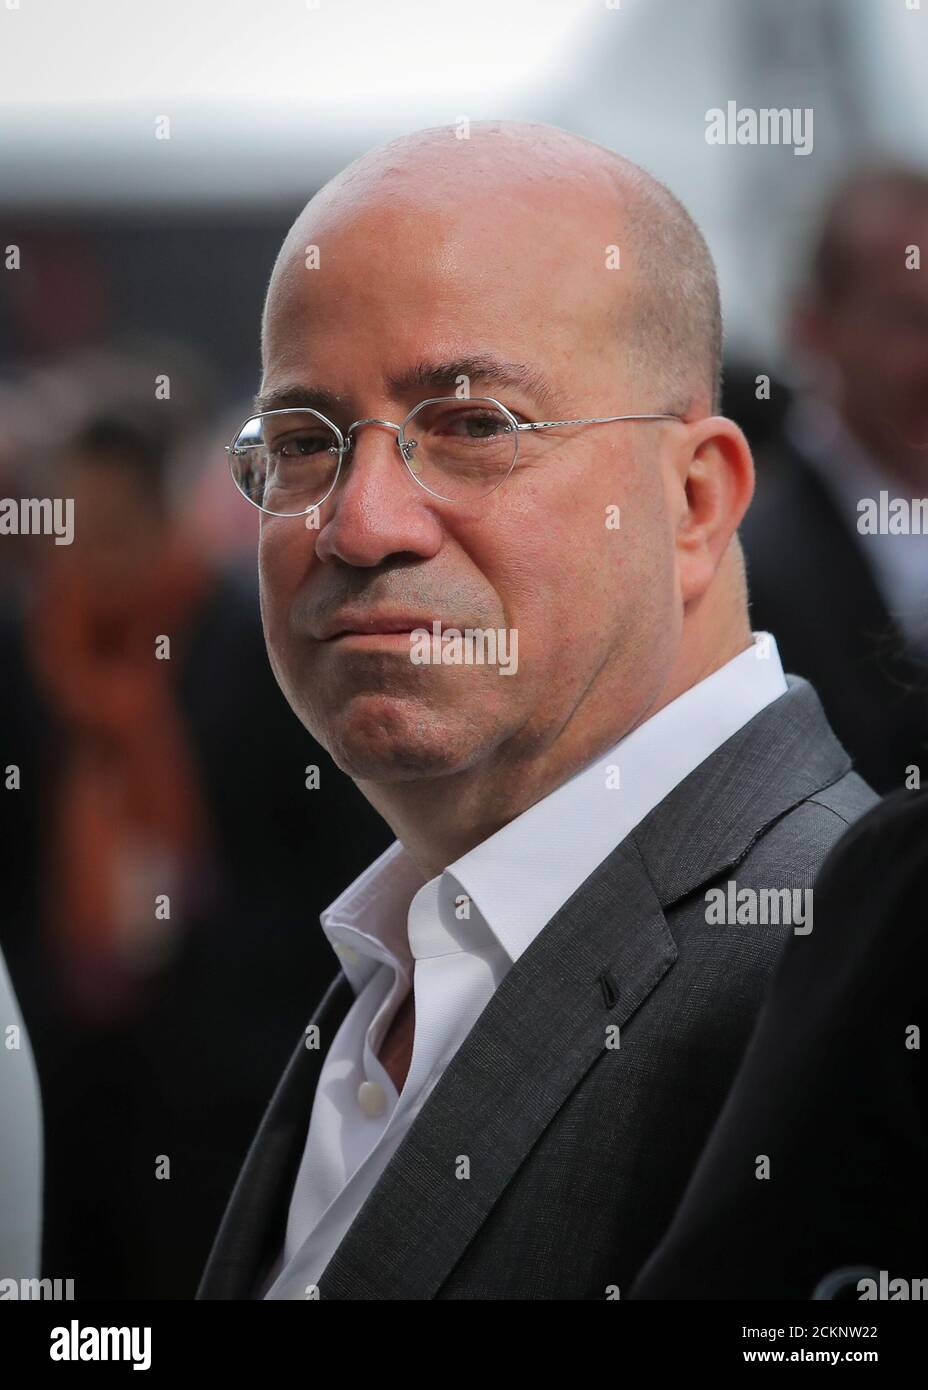 Jeff Zucker, president of CNN attends the grand opening of The Hudson Yards development, a residential, commercial, and retail space on Manhattan's West Side in New York City, New York, U.S., March 15, 2019. REUTERS/Brendan McDermid Stock Photo